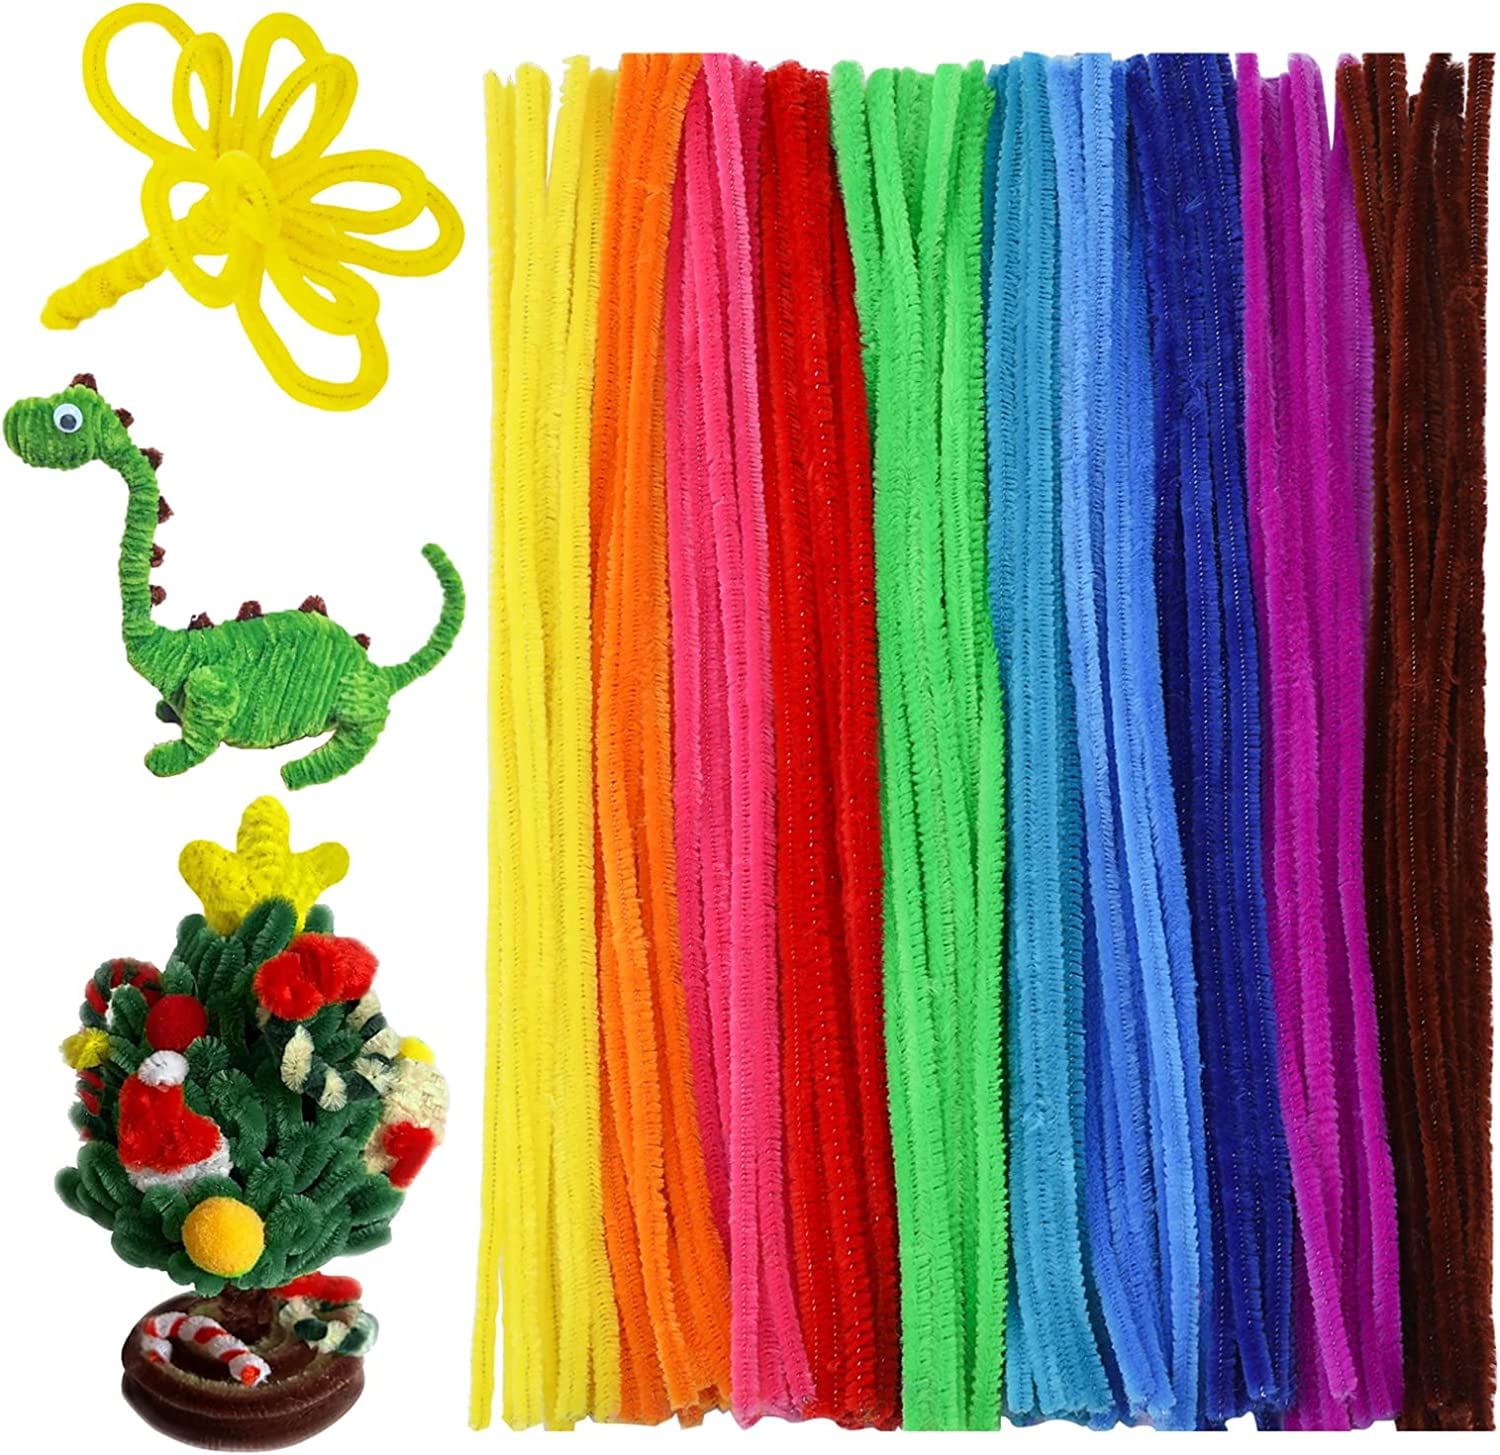 Chainplus 100 Pipe Cleaners - Chenille Pipe Cleaners Craft - Colorful Pipe  Cleaners for Crafts - Colored Pipe Cleaners for Kids - Bulk Pipe Cleaners 